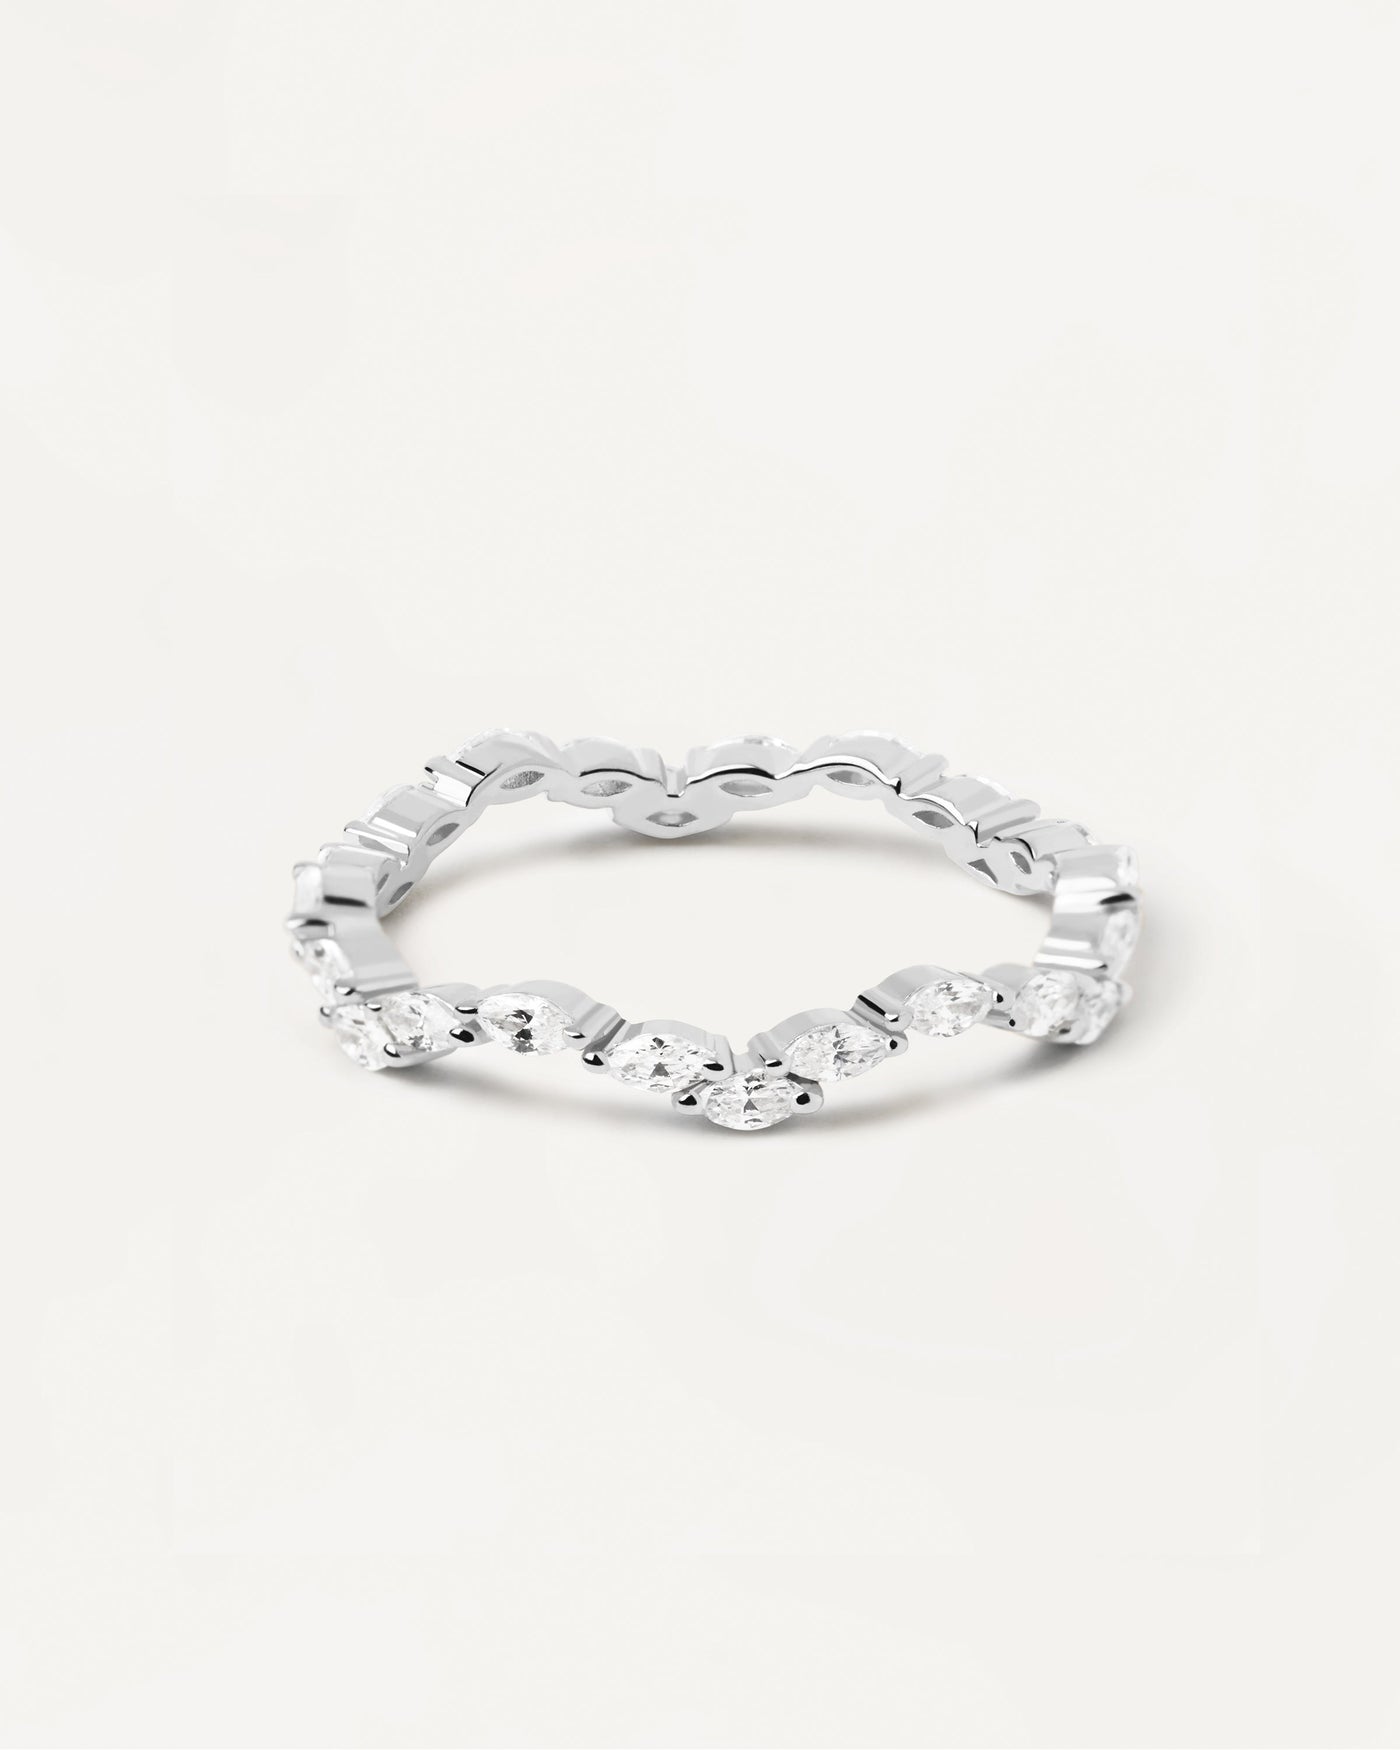 2023 Selection | Lake Silver Ring. Sterling silver wavy eternity ring with white zirconia. Get the latest arrival from PDPAOLA. Place your order safely and get this Best Seller. Free Shipping.